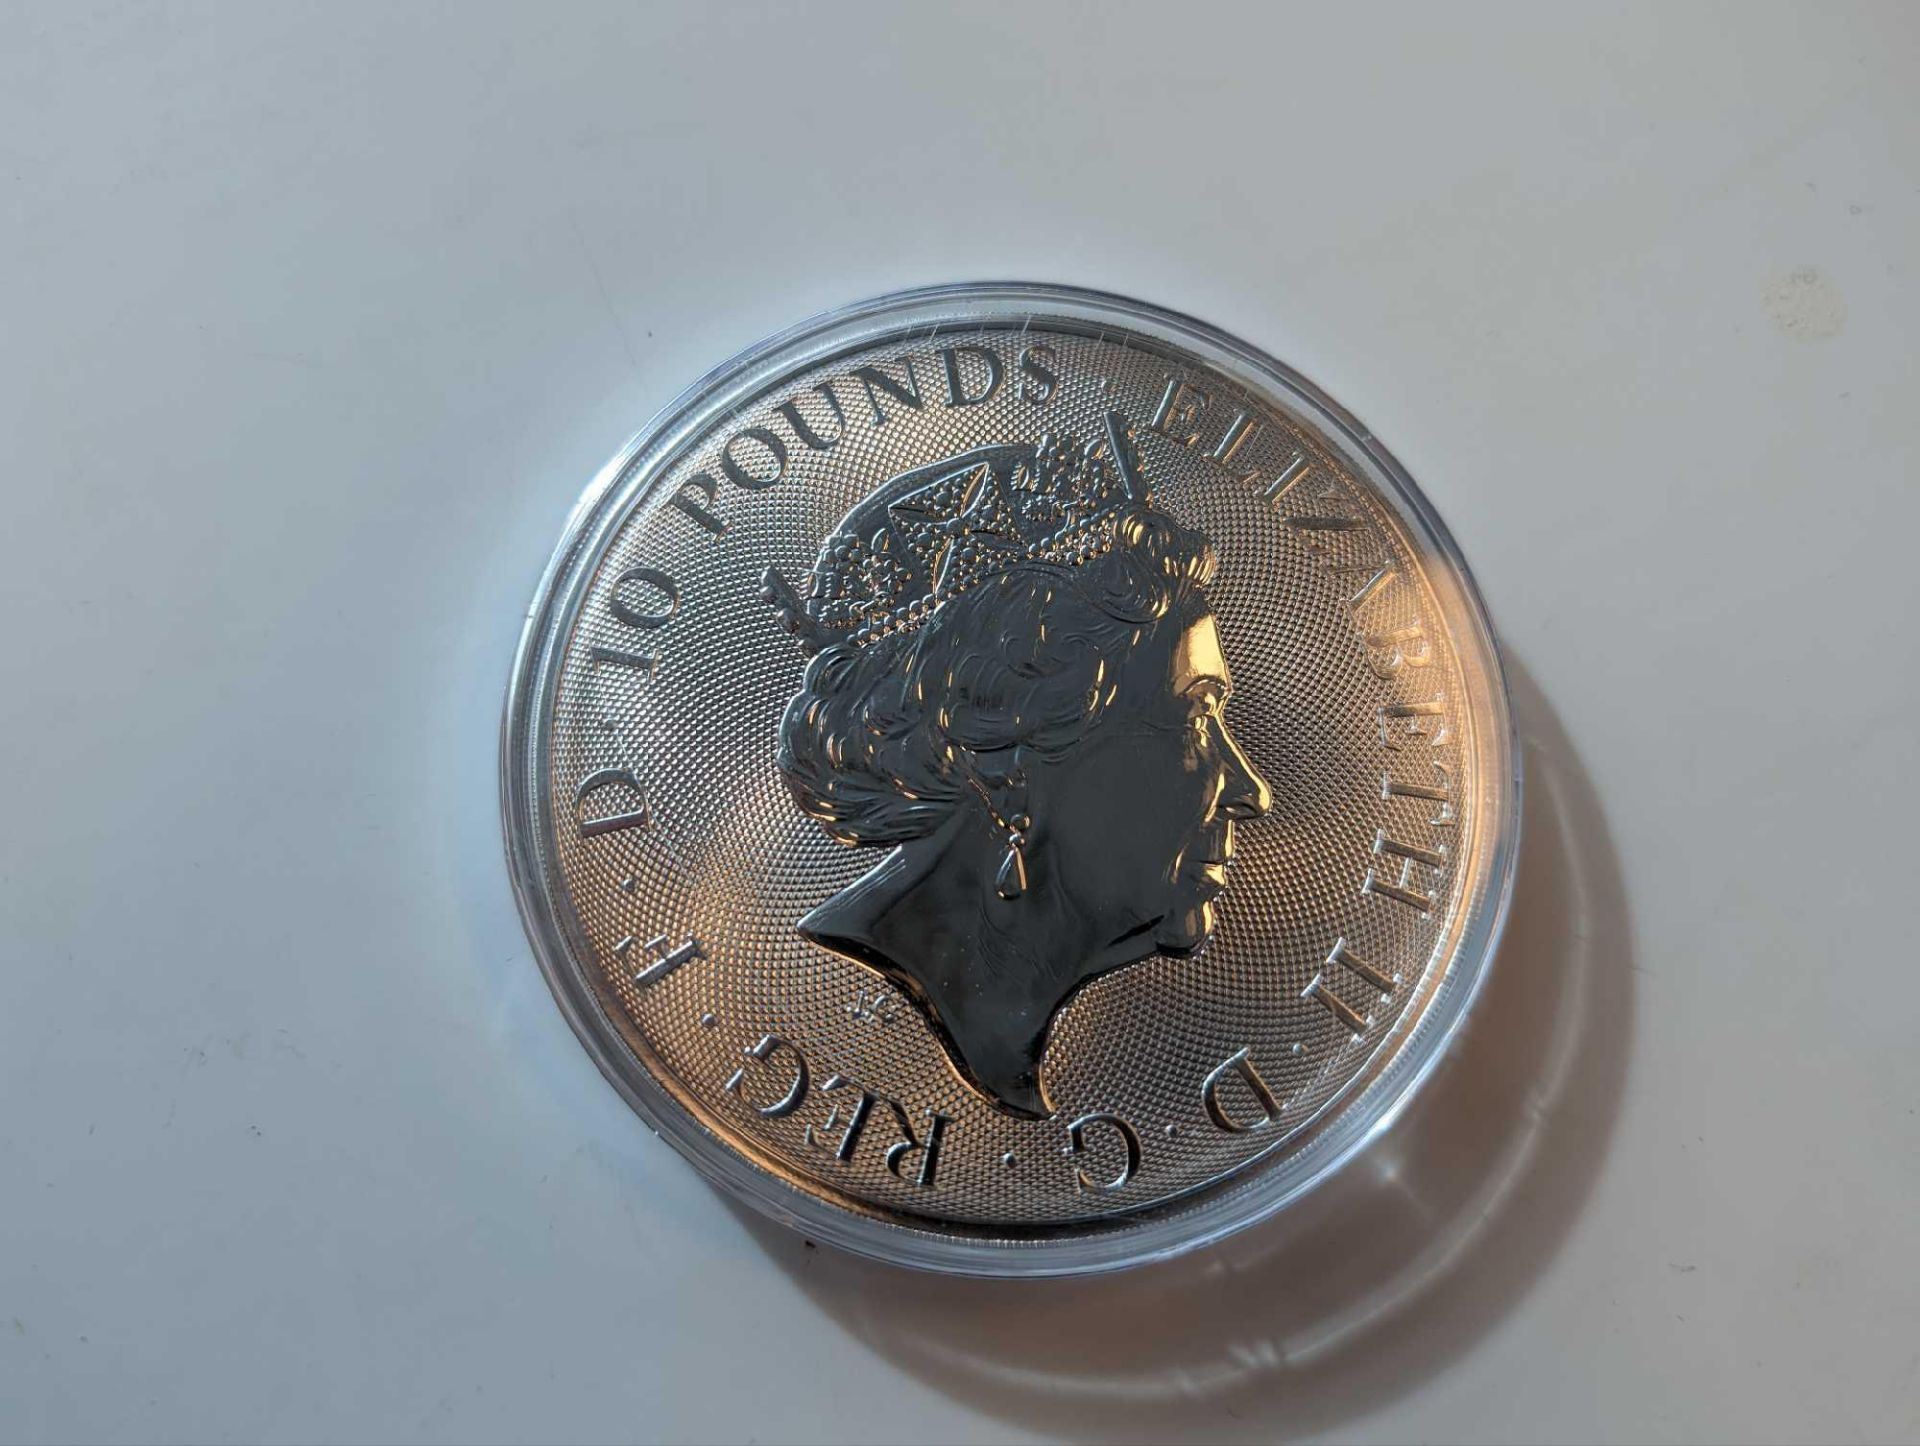 10 oz queen beast to completer coin - Image 3 of 3